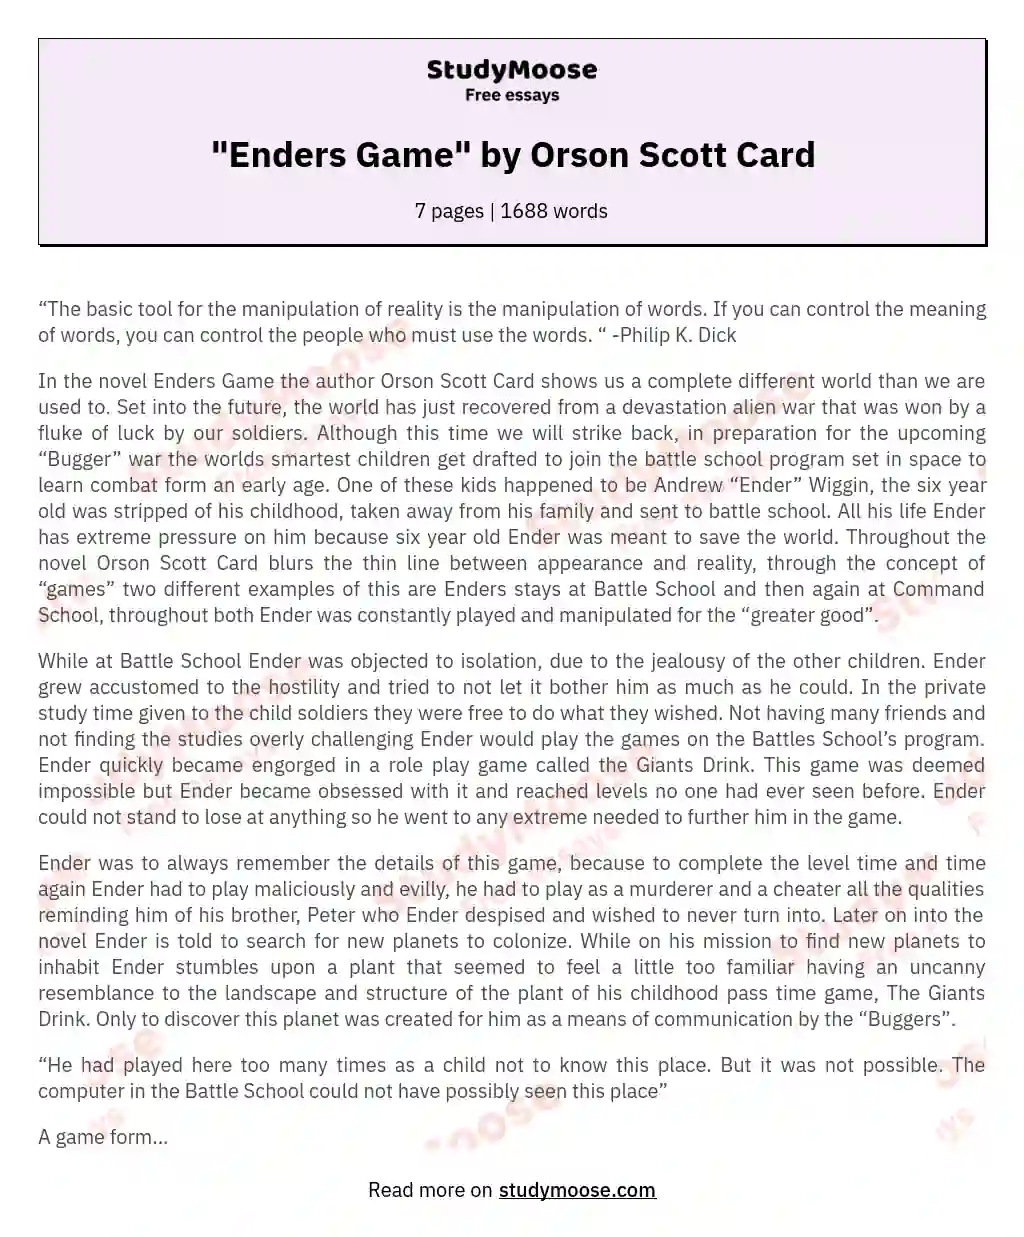 "Enders Game" by Orson Scott Card